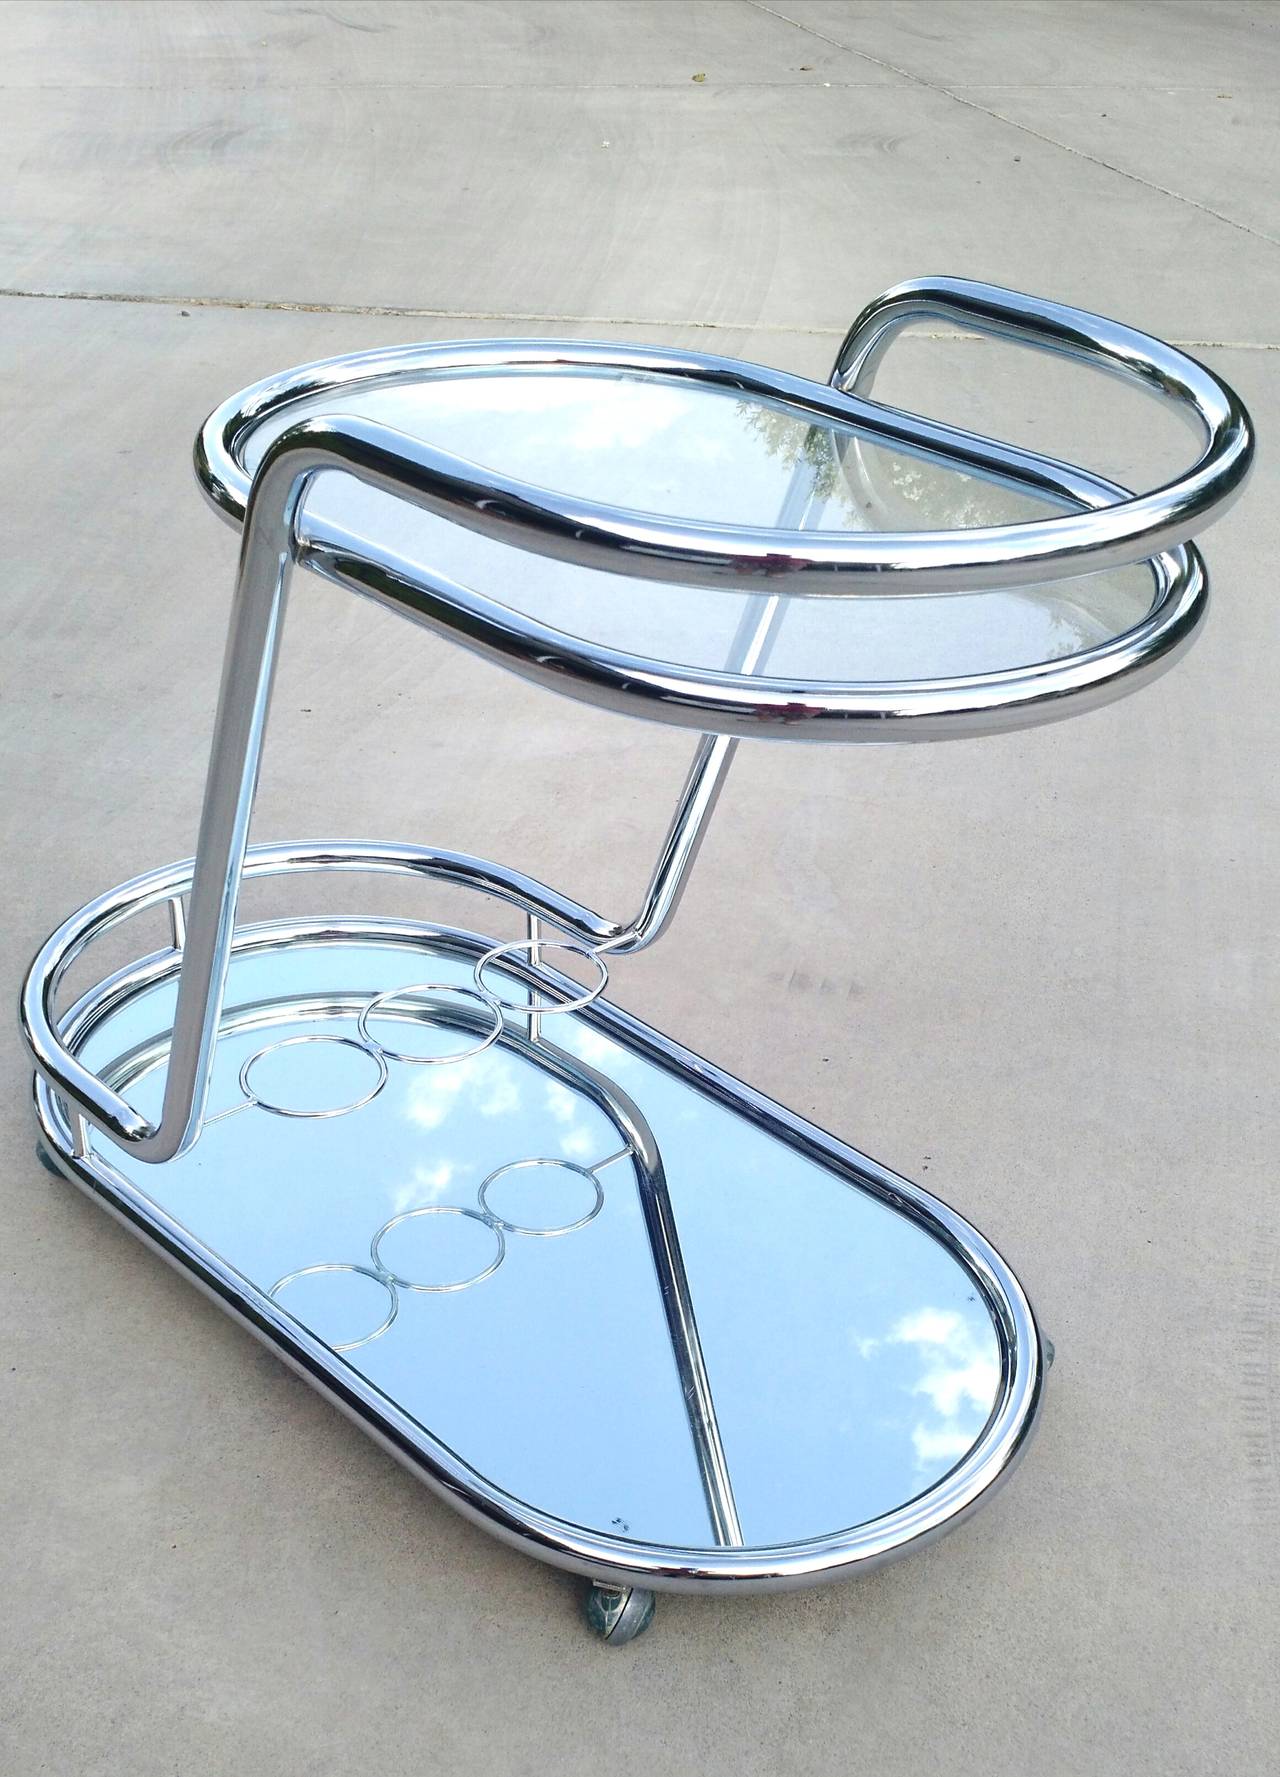 Gleaming bar cart with cantilever design, circa 1970s
Sculpted out of seamless chrome plated steel tubing with
glass top shelf and mirrored glass bottom. 3 ring bottle holder on bottom.
Killer piece! Un-signed by designer.